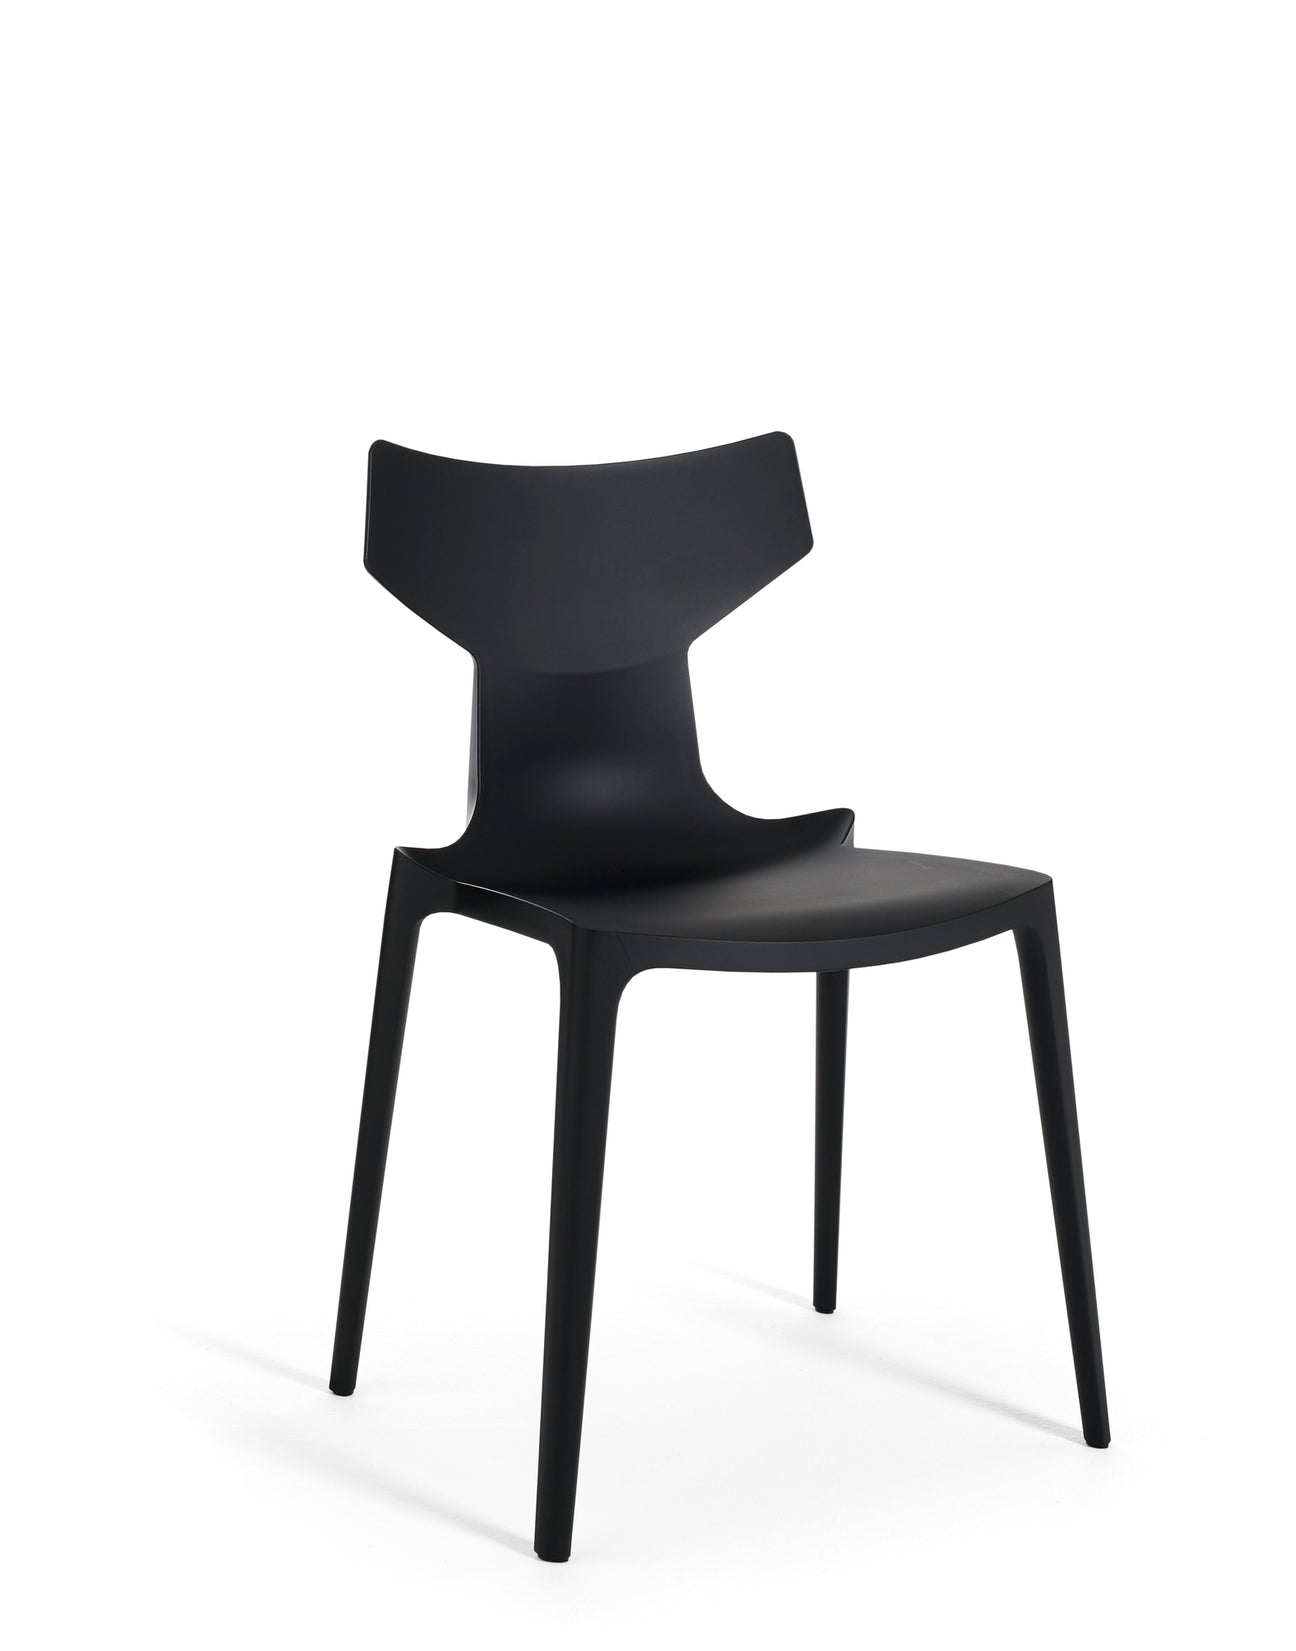 RE-CHAIR POWERED BY ILLY (2 SEDIE)